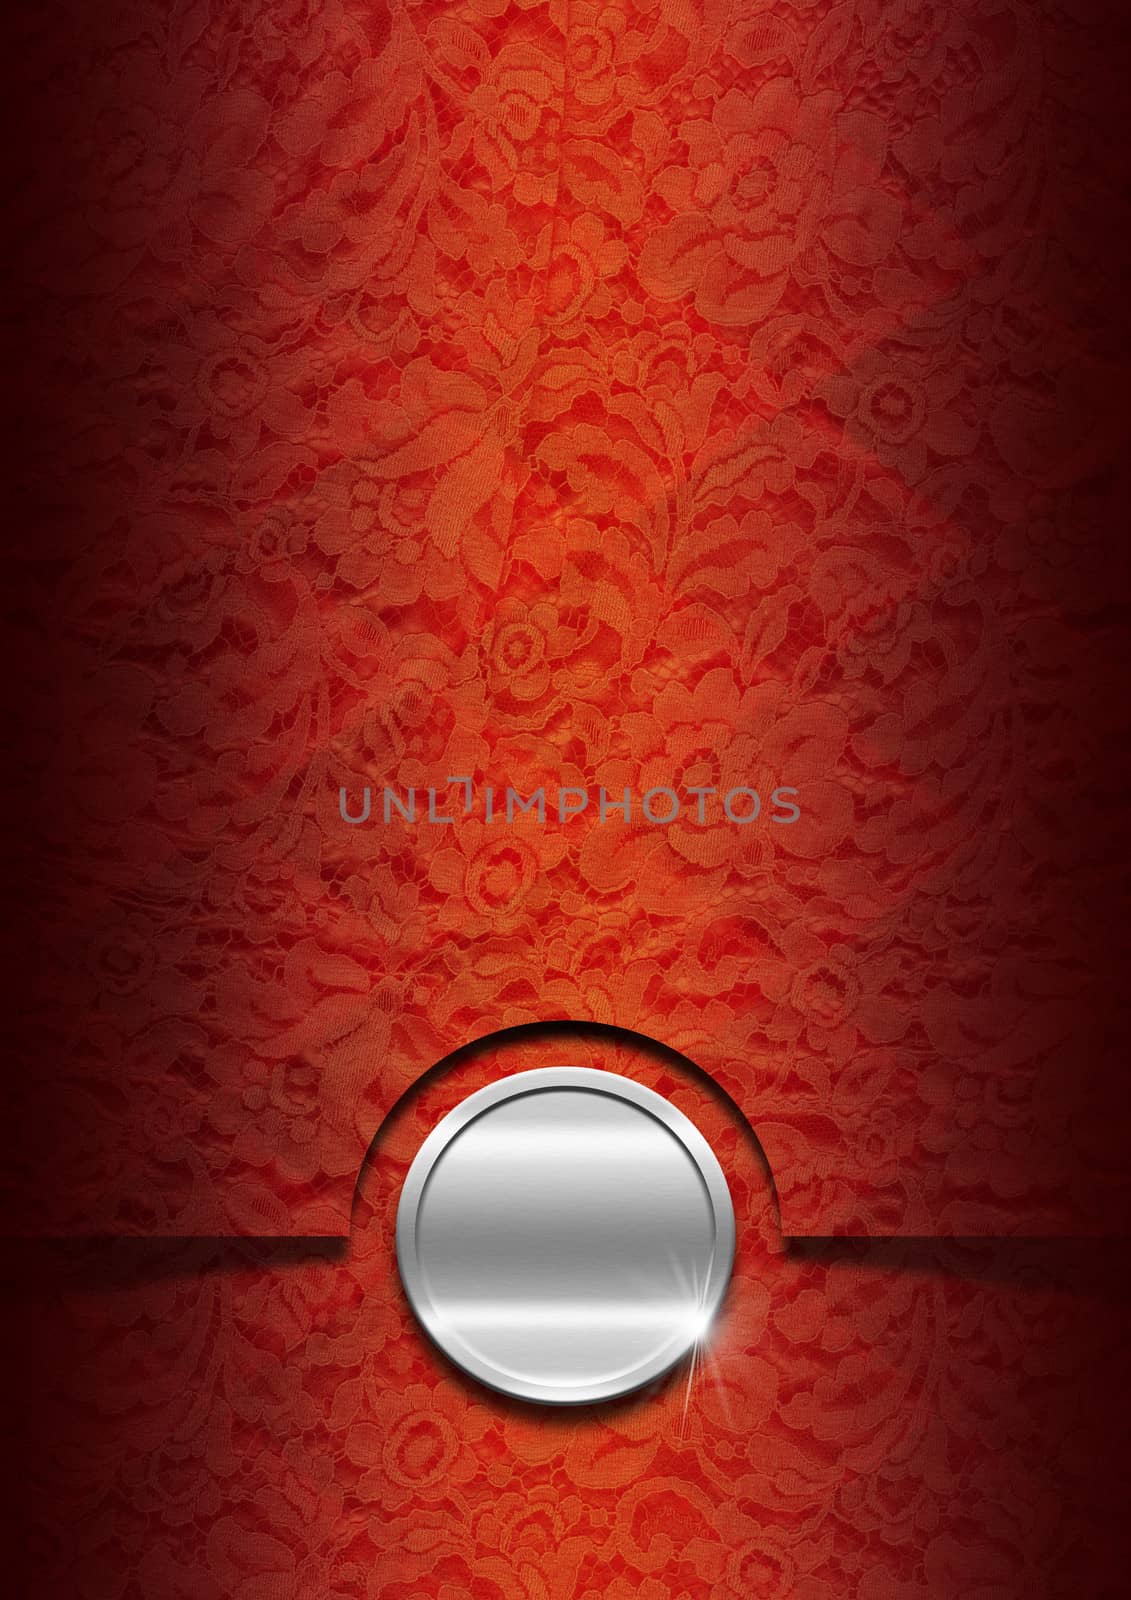 Luxury Floral Orange and Red Background by catalby